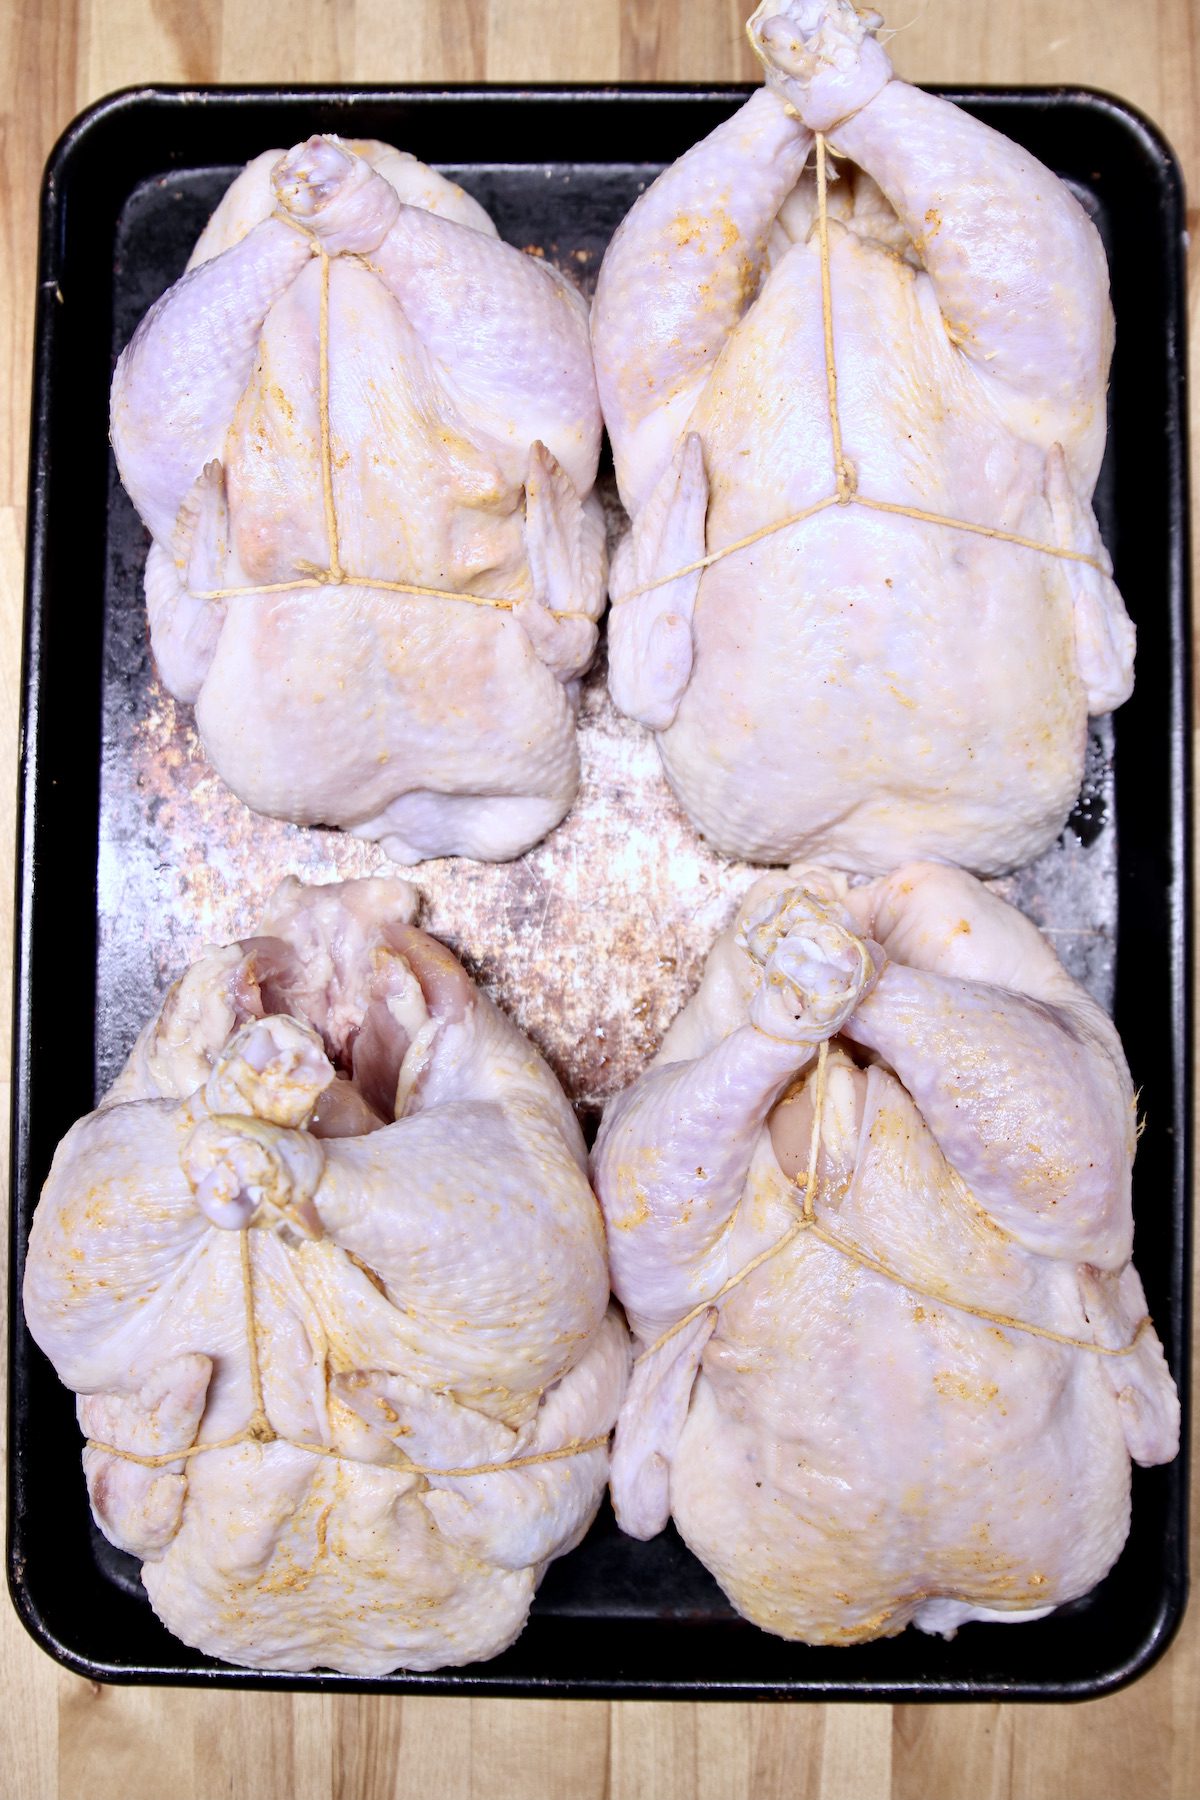 4 whole chickens trussed for grilling